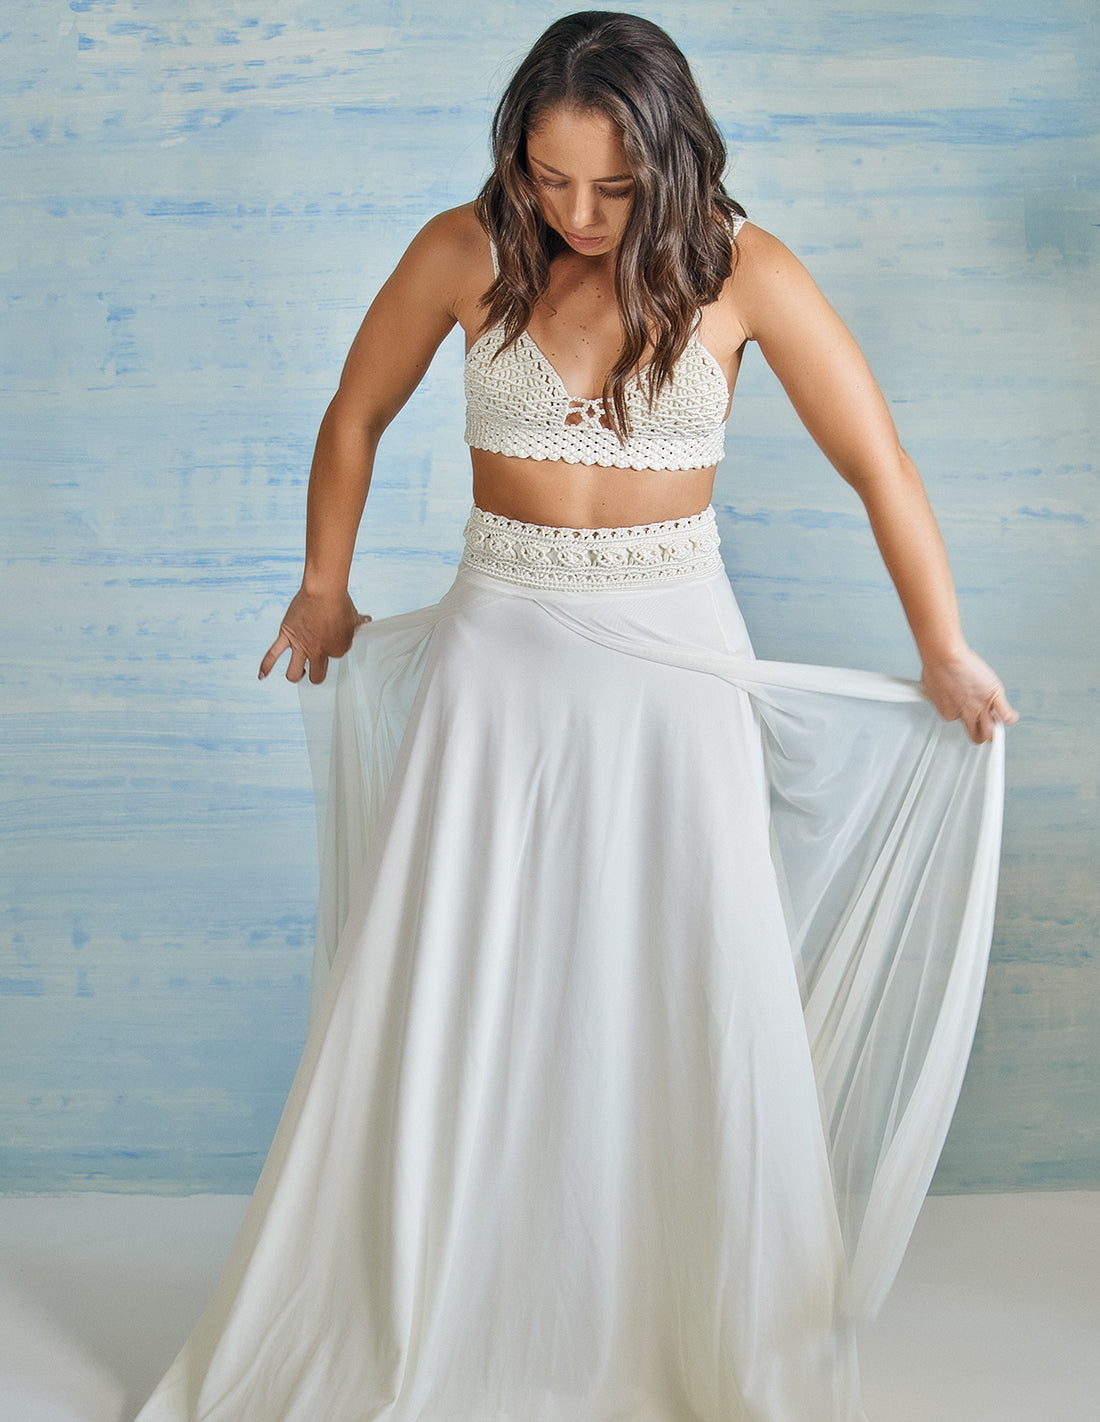 Crown Skirt Ivory. Beach Skirt With Hand Woven Macramé In Ivory. Entreaguas